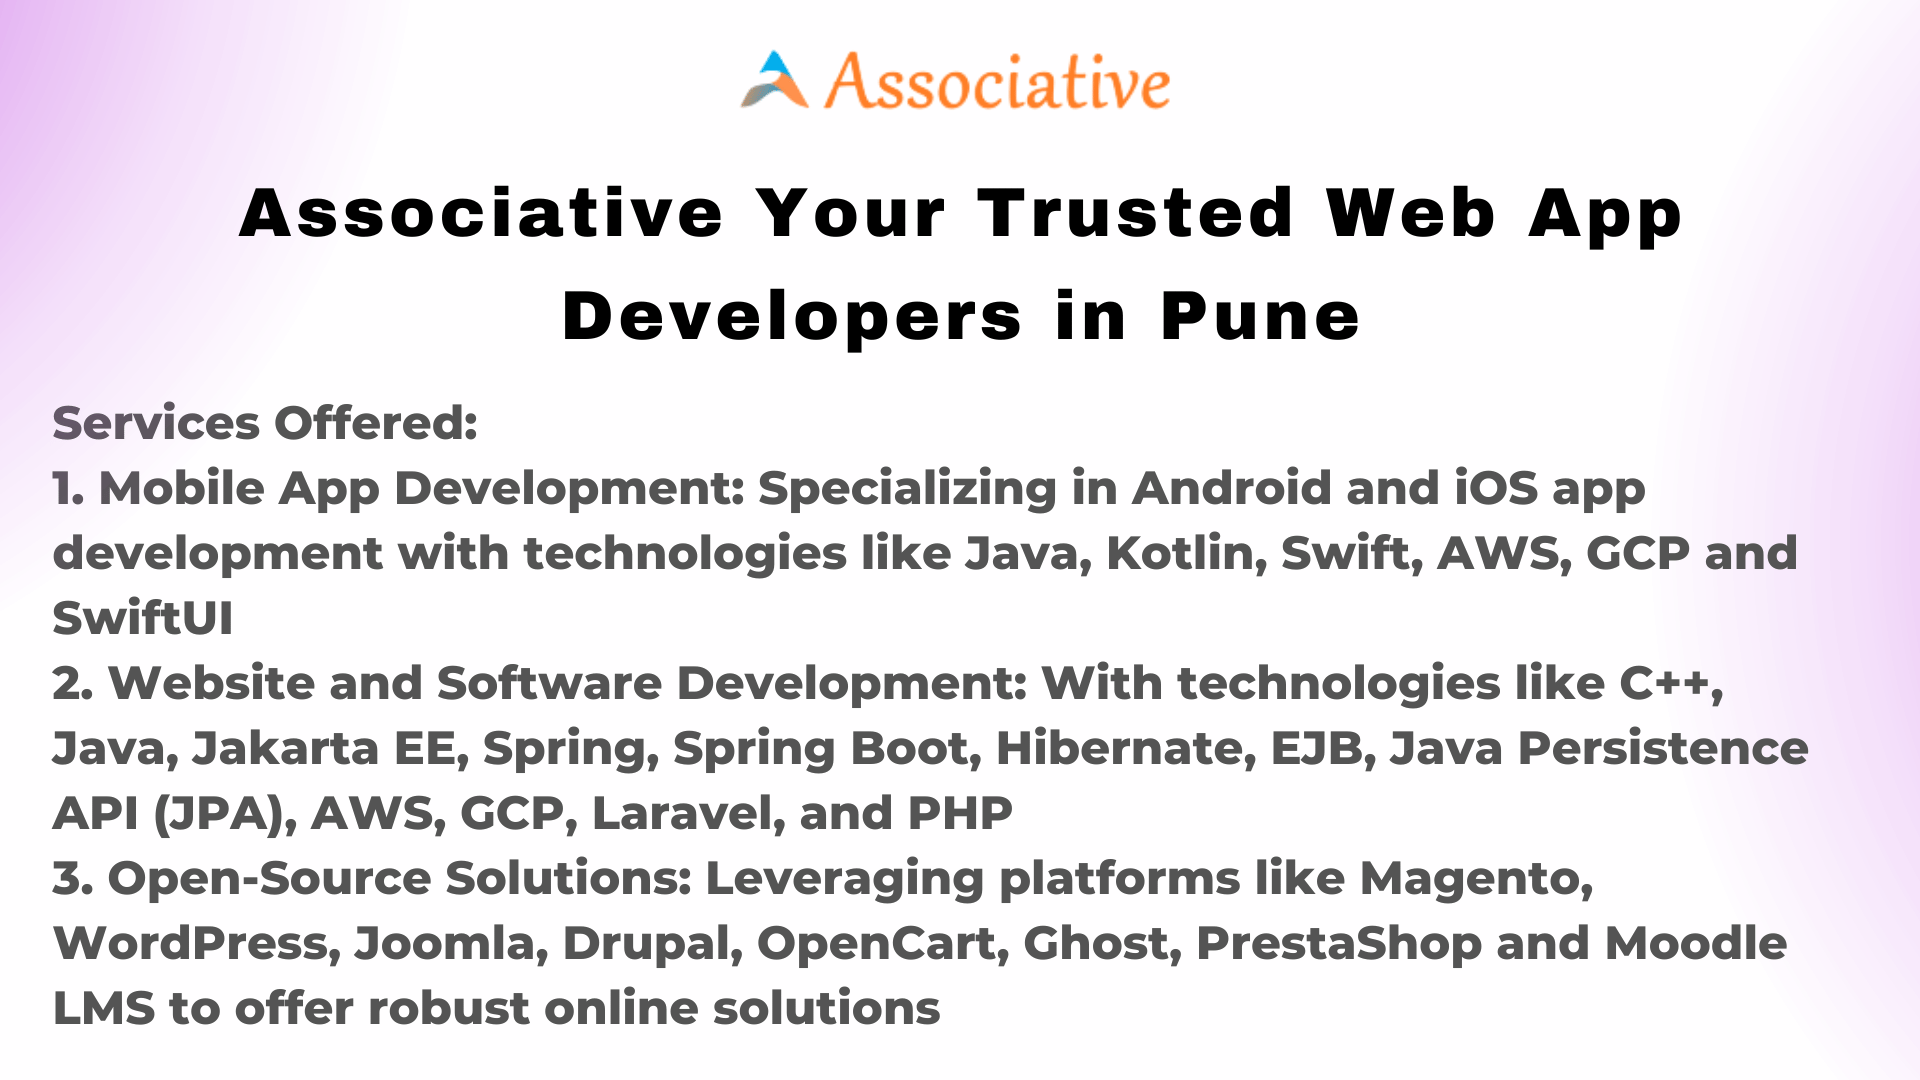 Associative Your Trusted Web App Developers in Pune